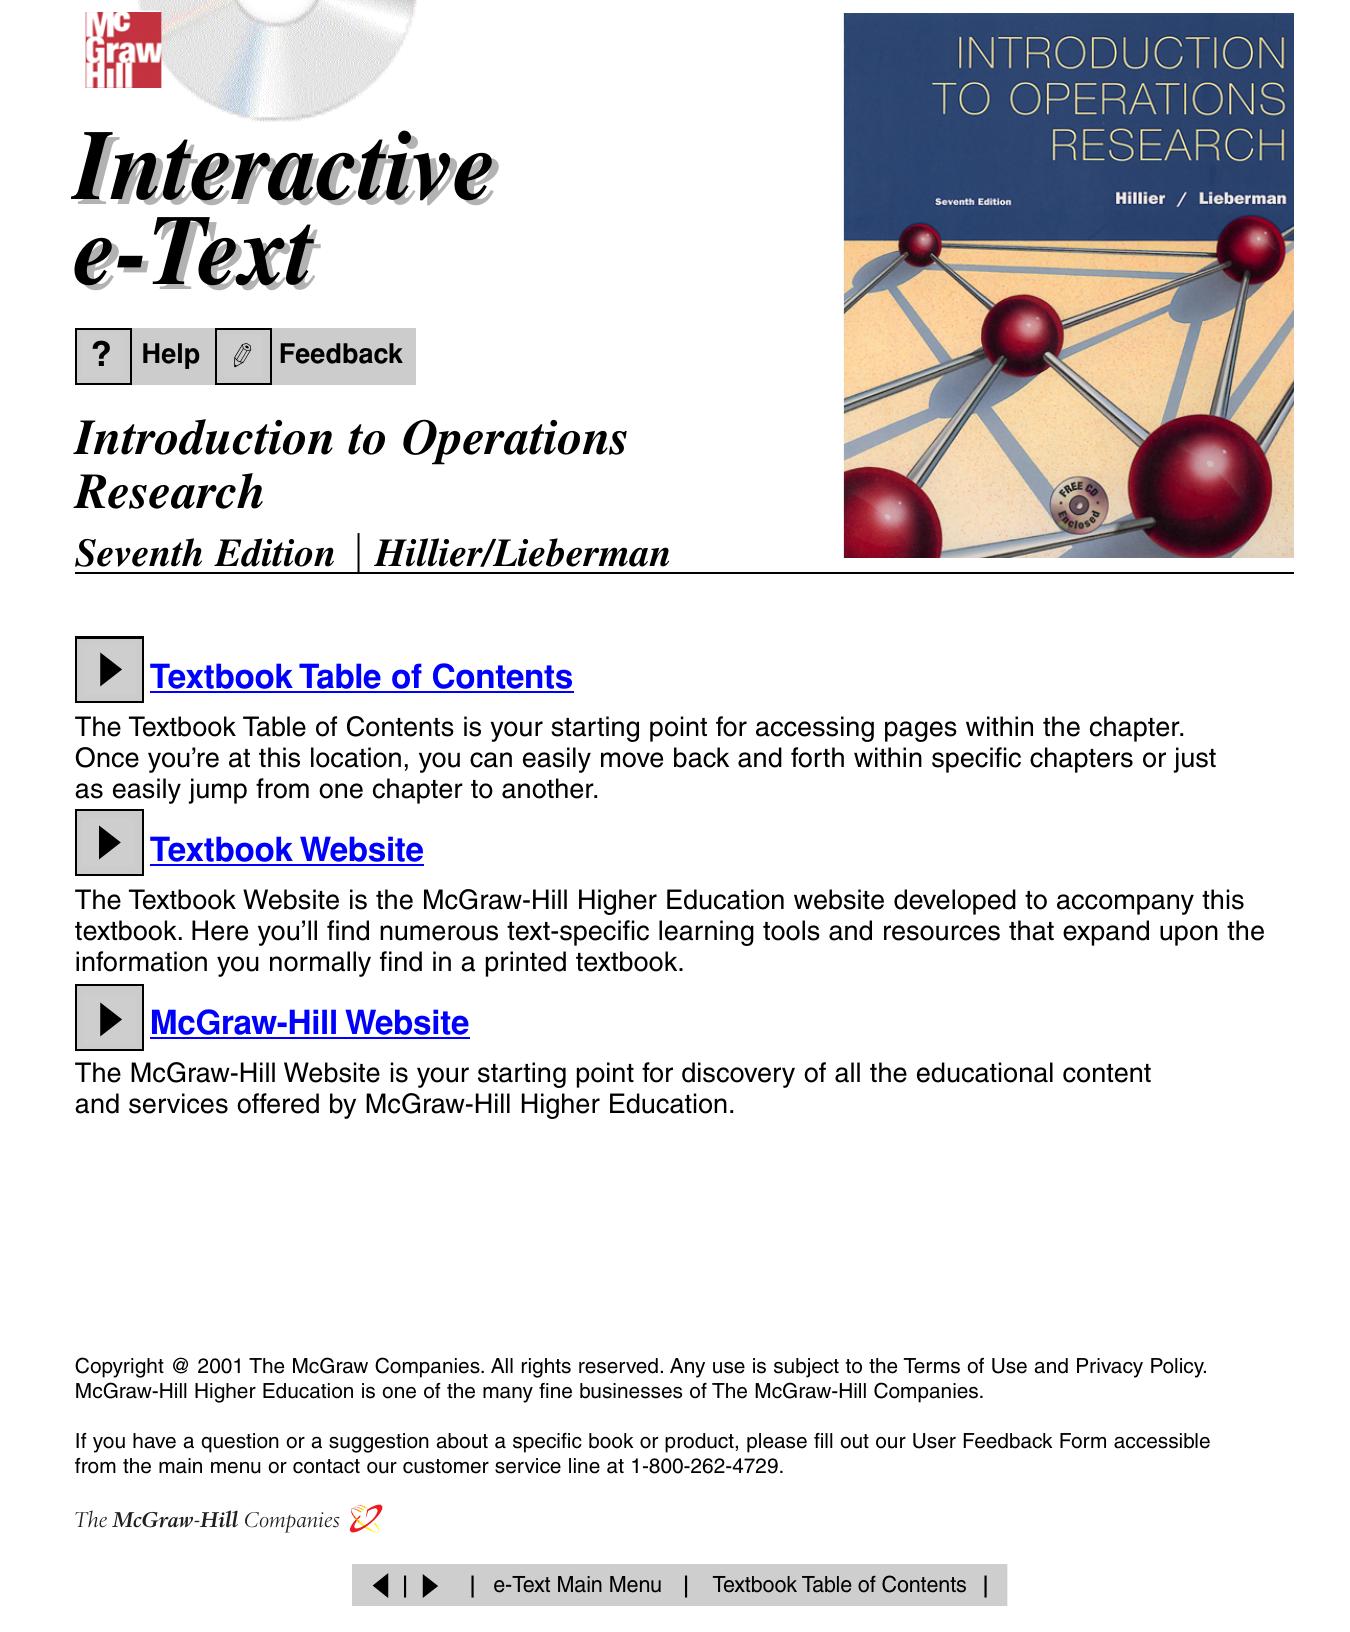 Intorduction to Operations Research 7ed, Hillier & Lieberman, 1240pp, MGH